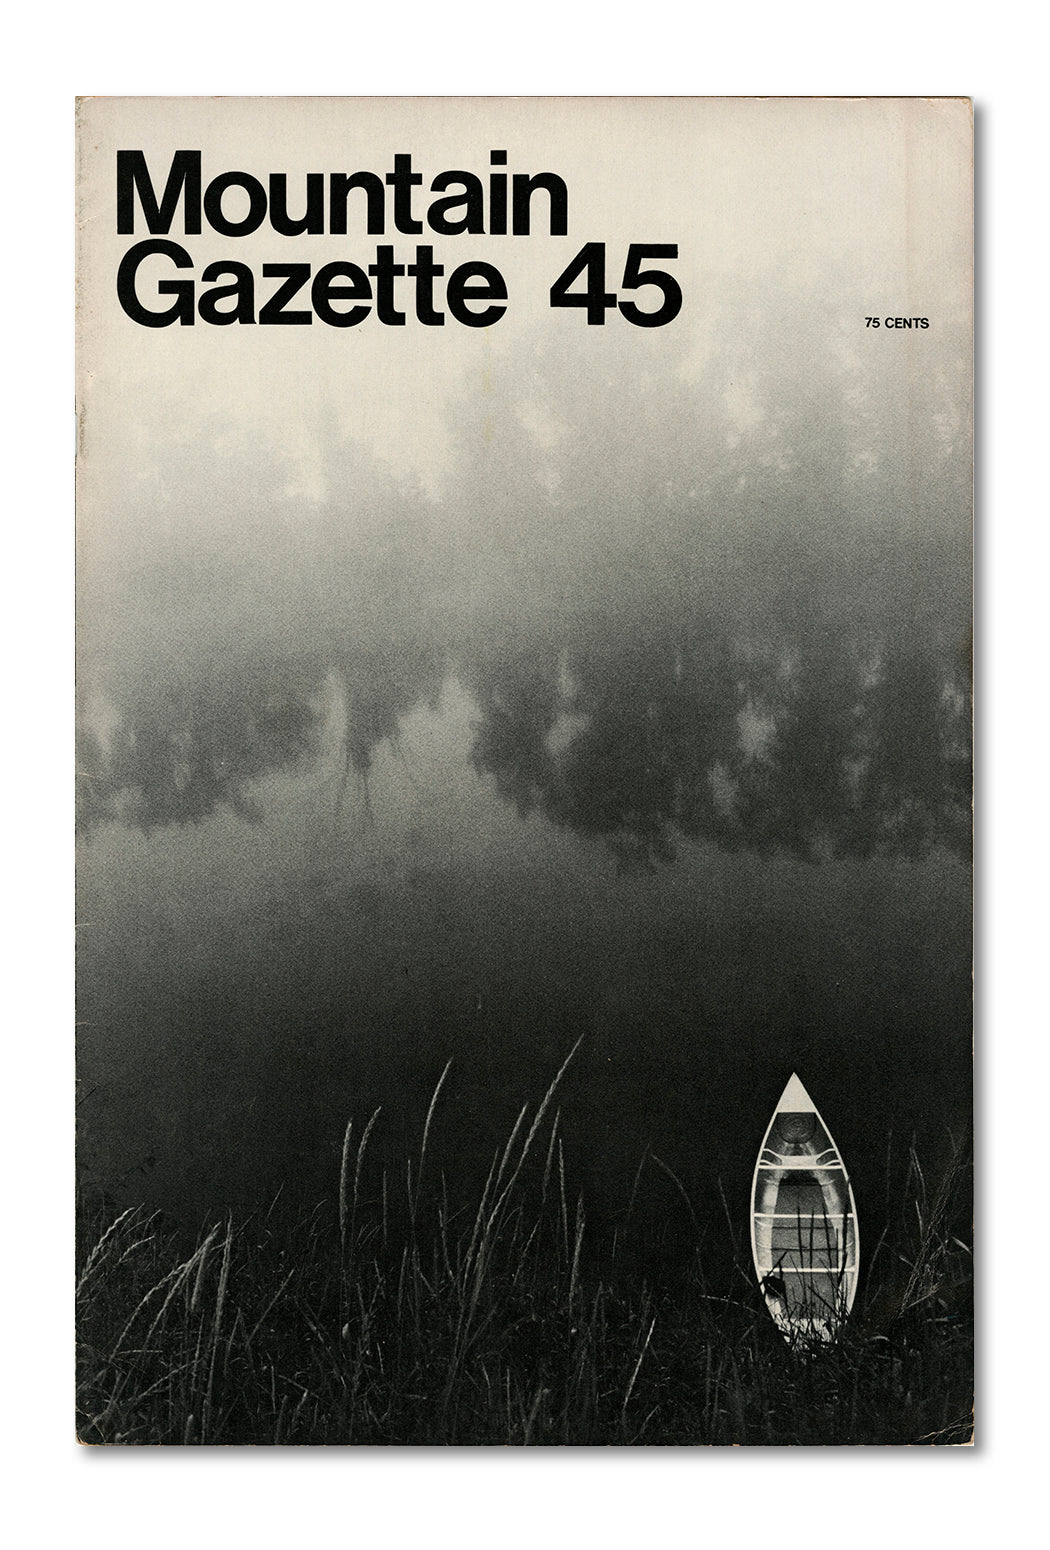 Issue 45